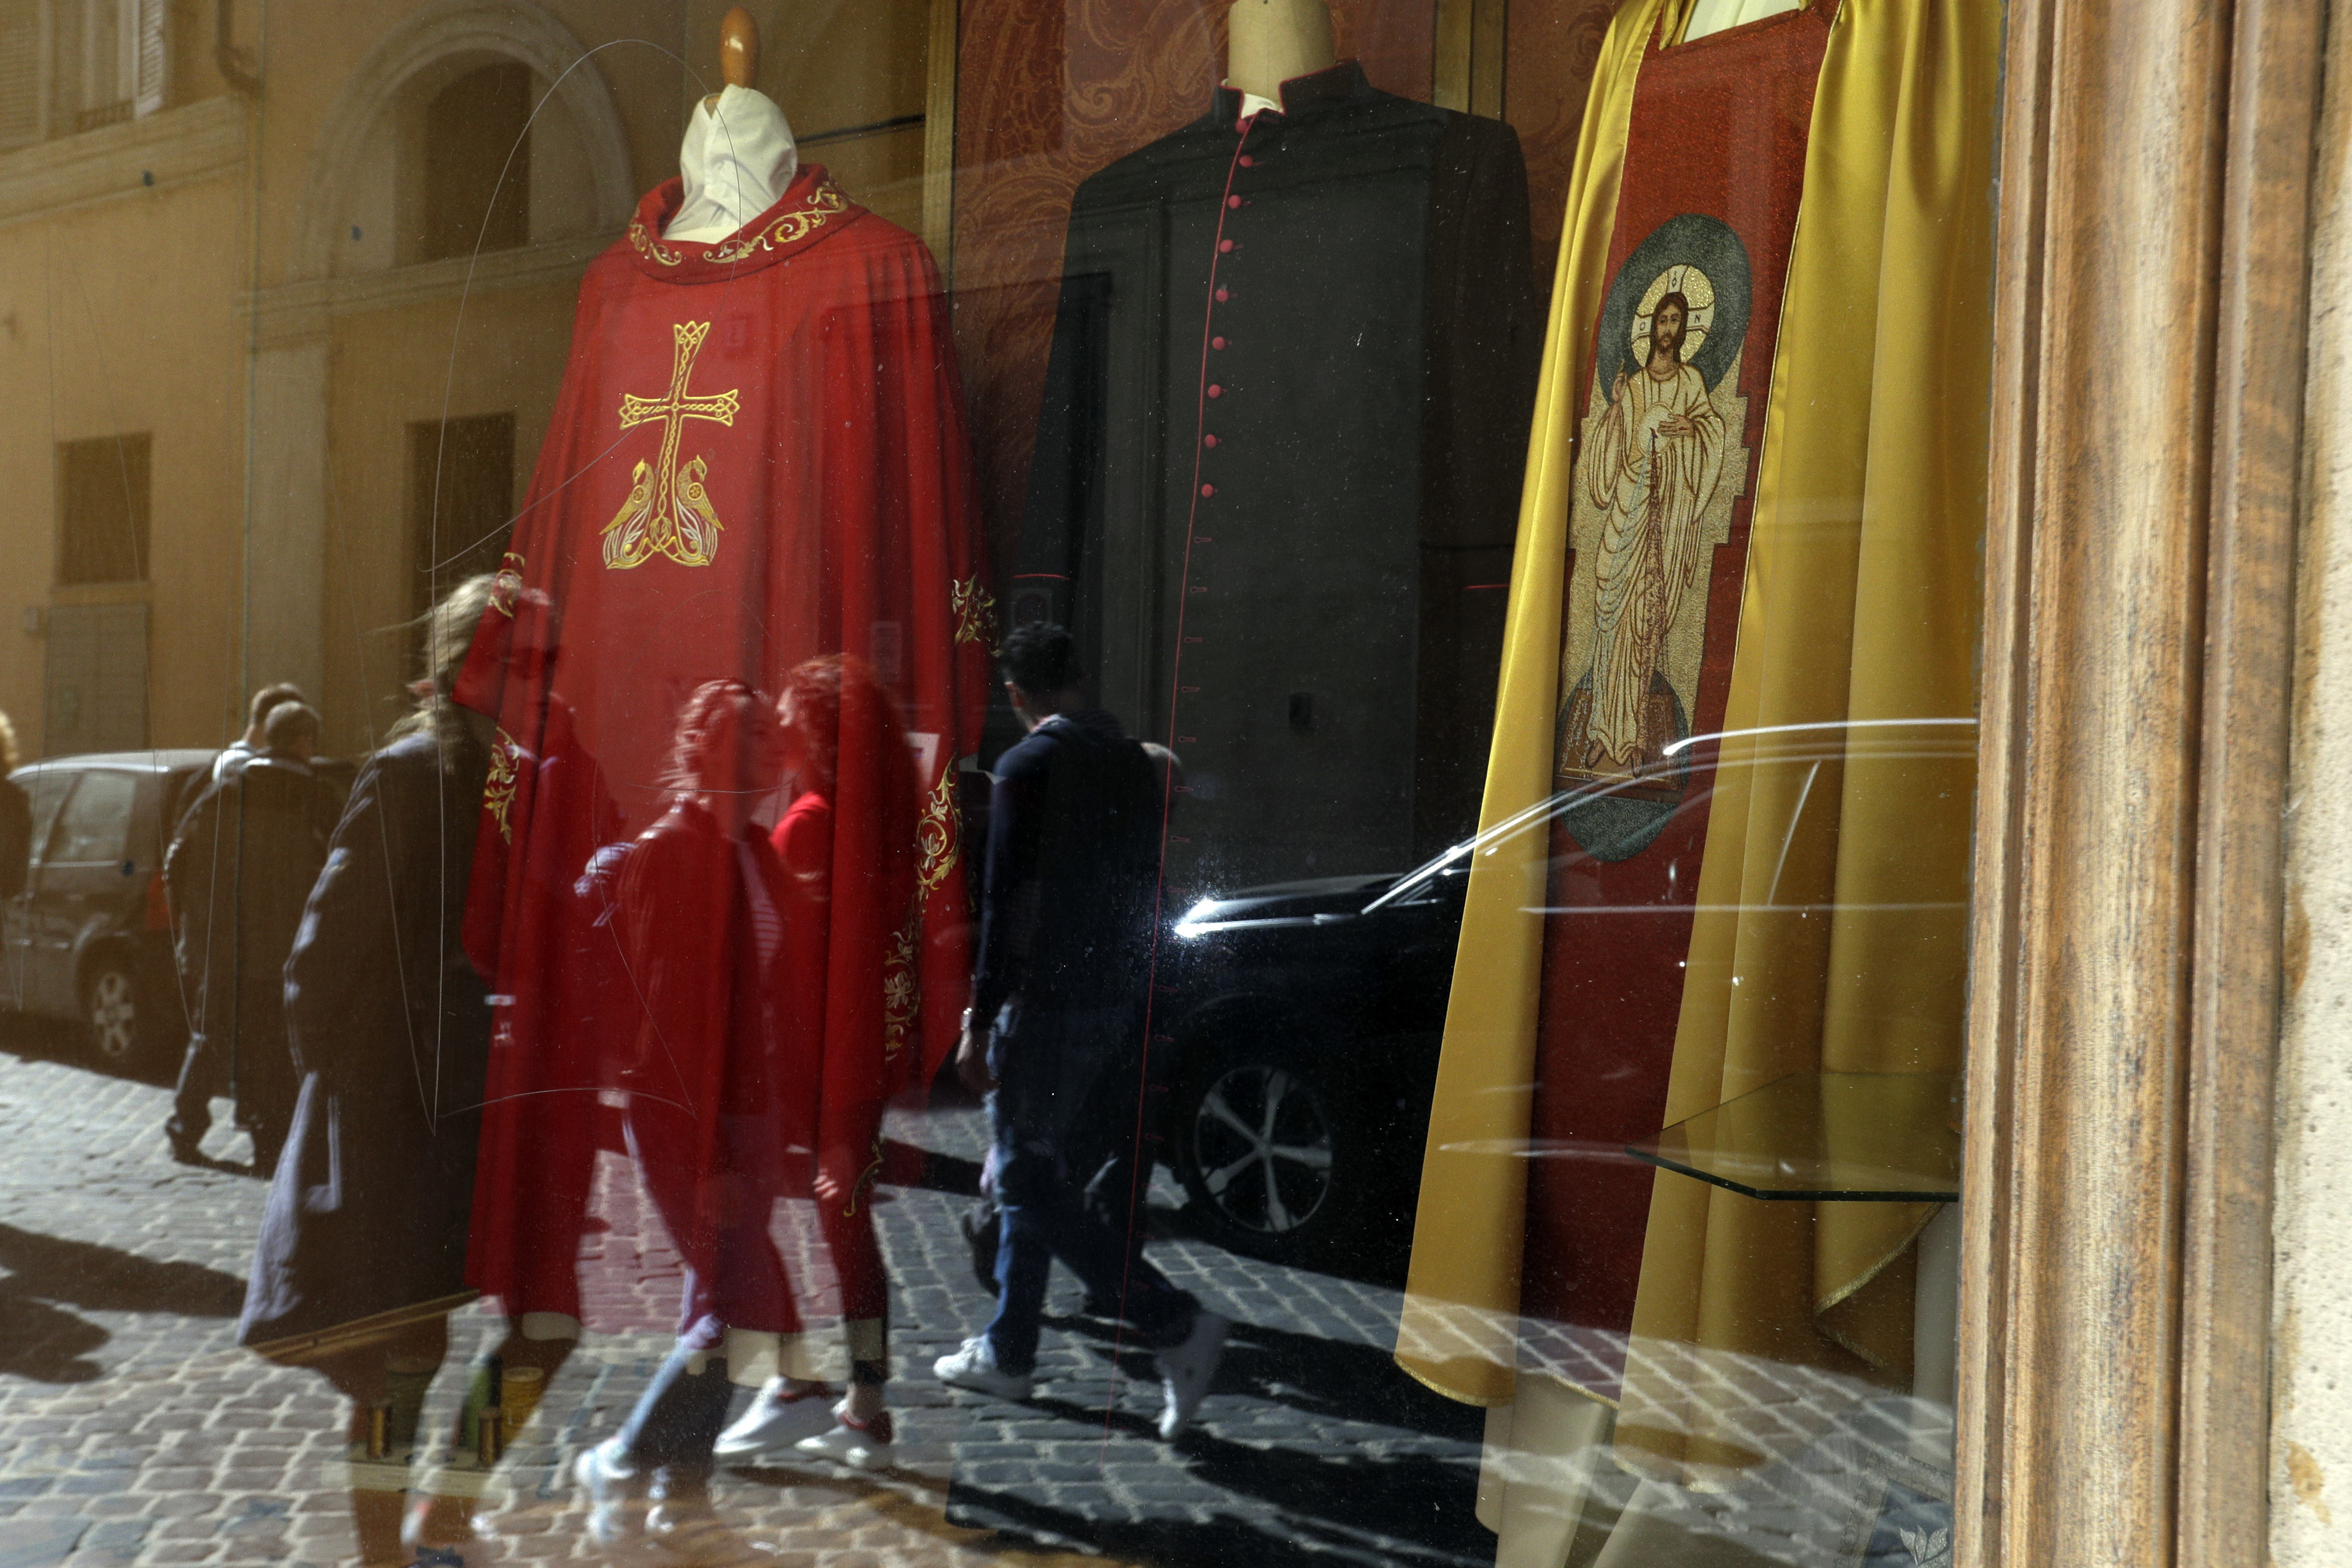 Passers by are reflected in the window of a clergy robes shop, in Rome, Thursday, March 7, 2019. (AP Photo/Gregorio Borgia)